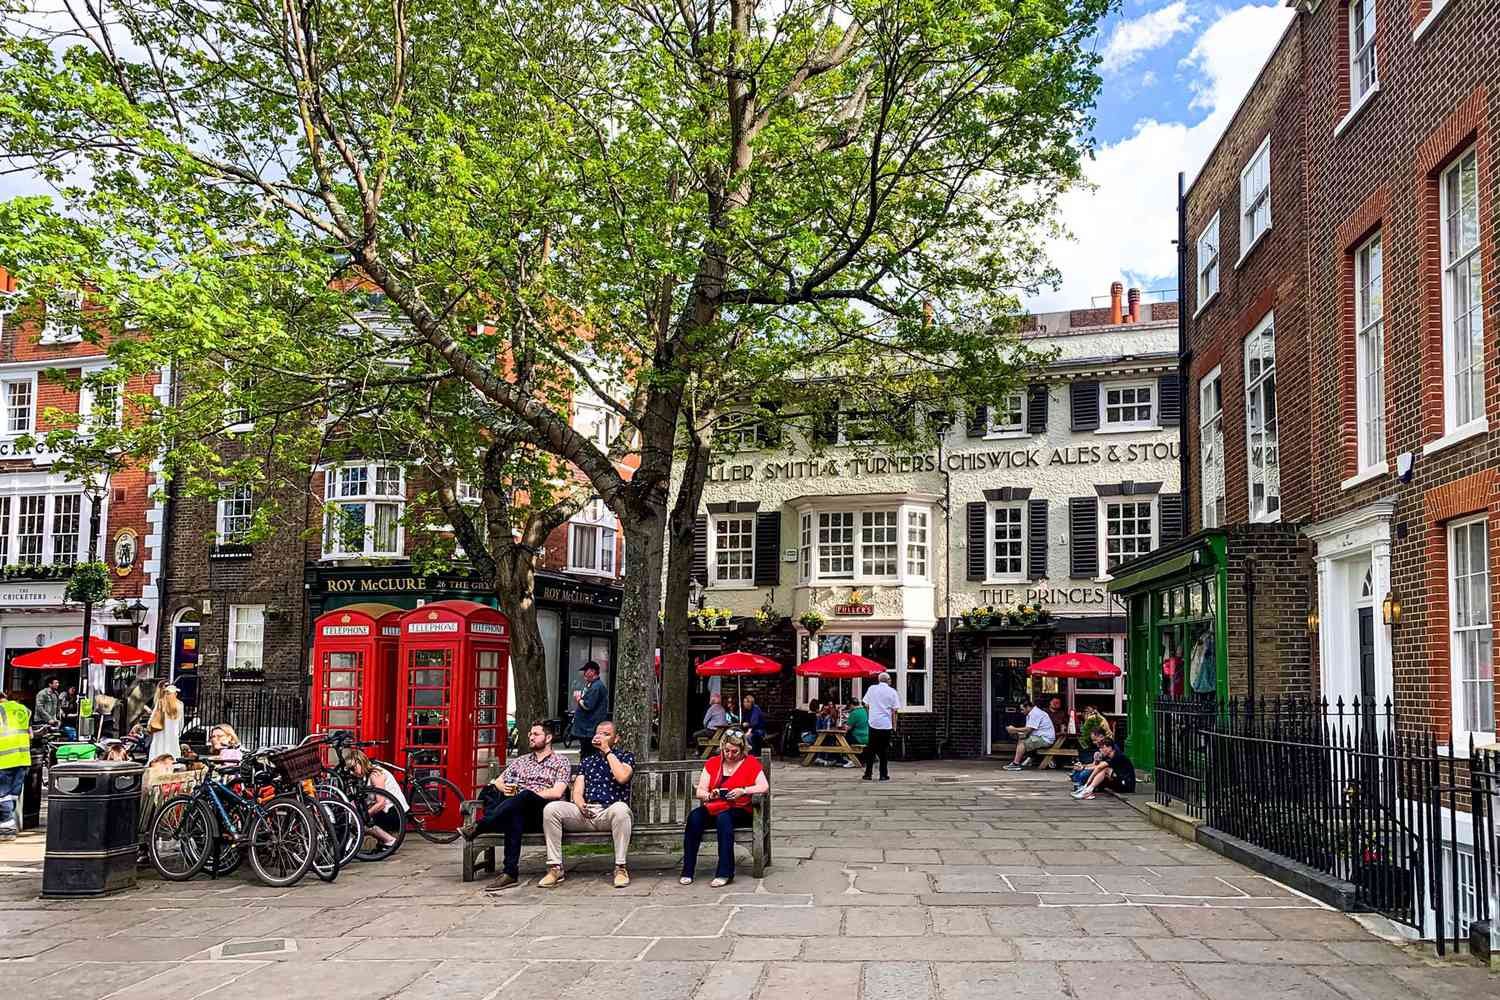 6 Can't-miss Pubs, Inns, Shops, and Towns in the U.K., According to T+L Editors